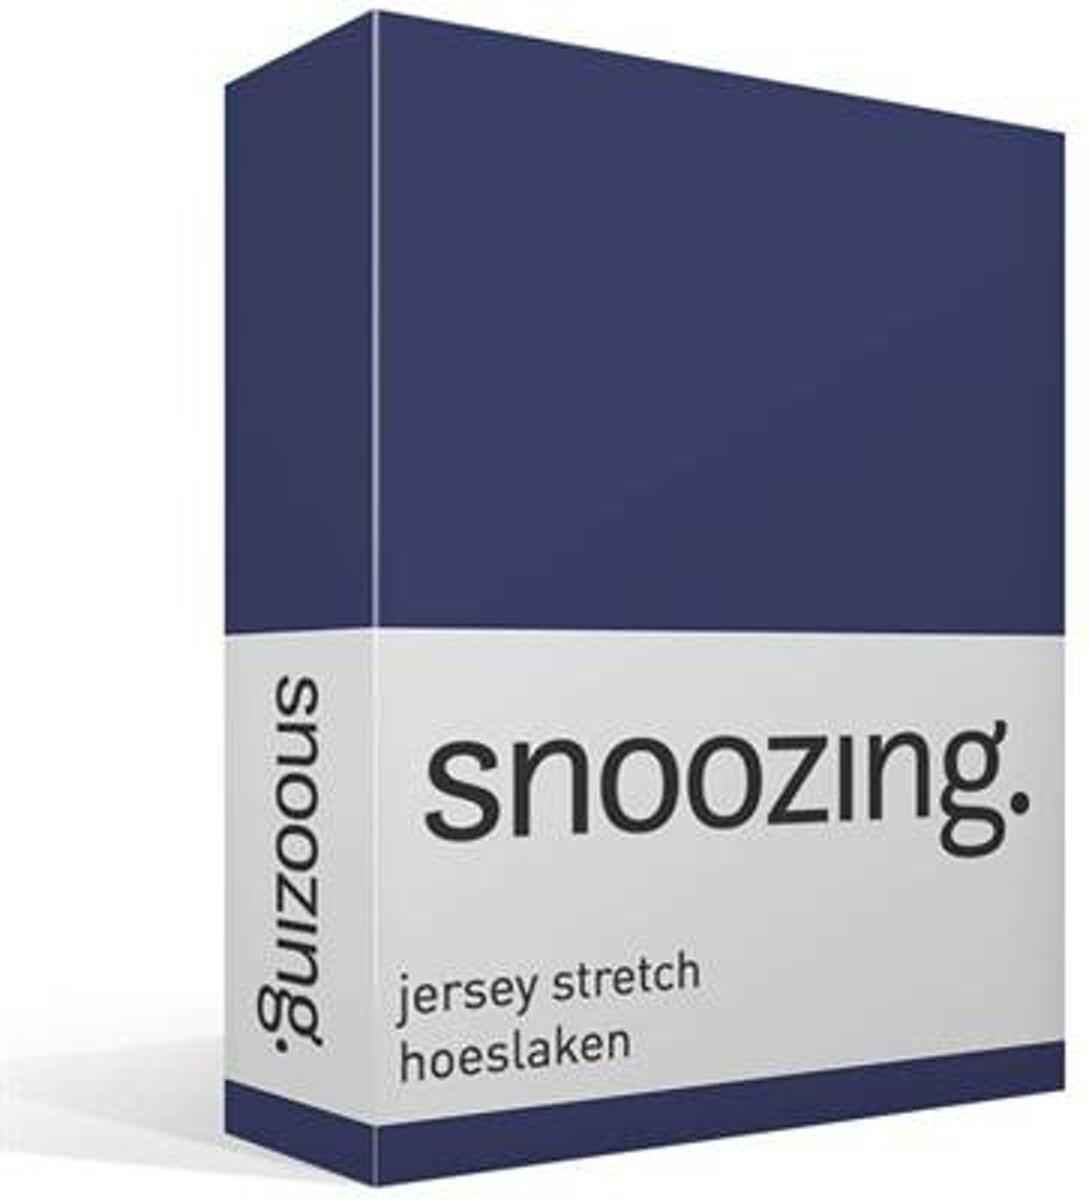 Snoozing Jersey Stretch - Hoeslaken - Tweepersoons - 140/150x200/220 cm - Navy